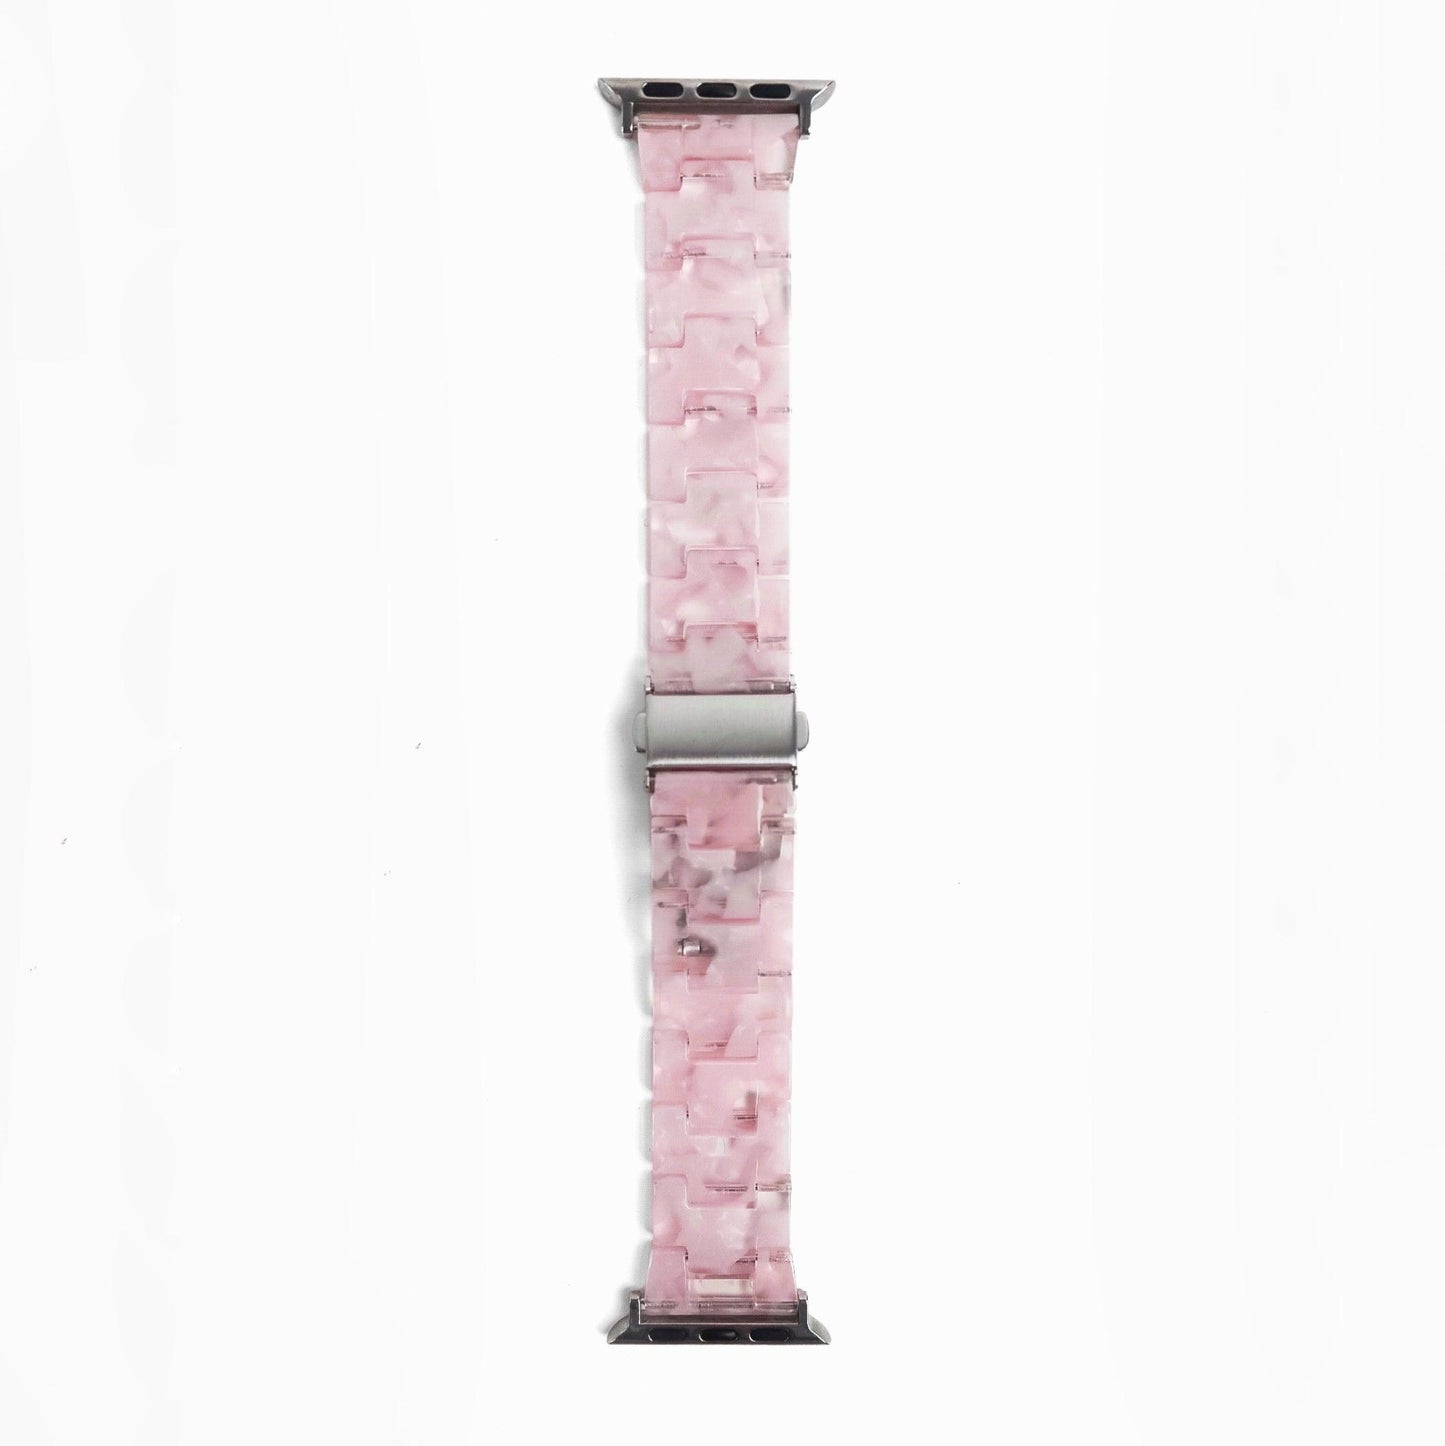 Polly Resin Apple Watch Band - Light Pink